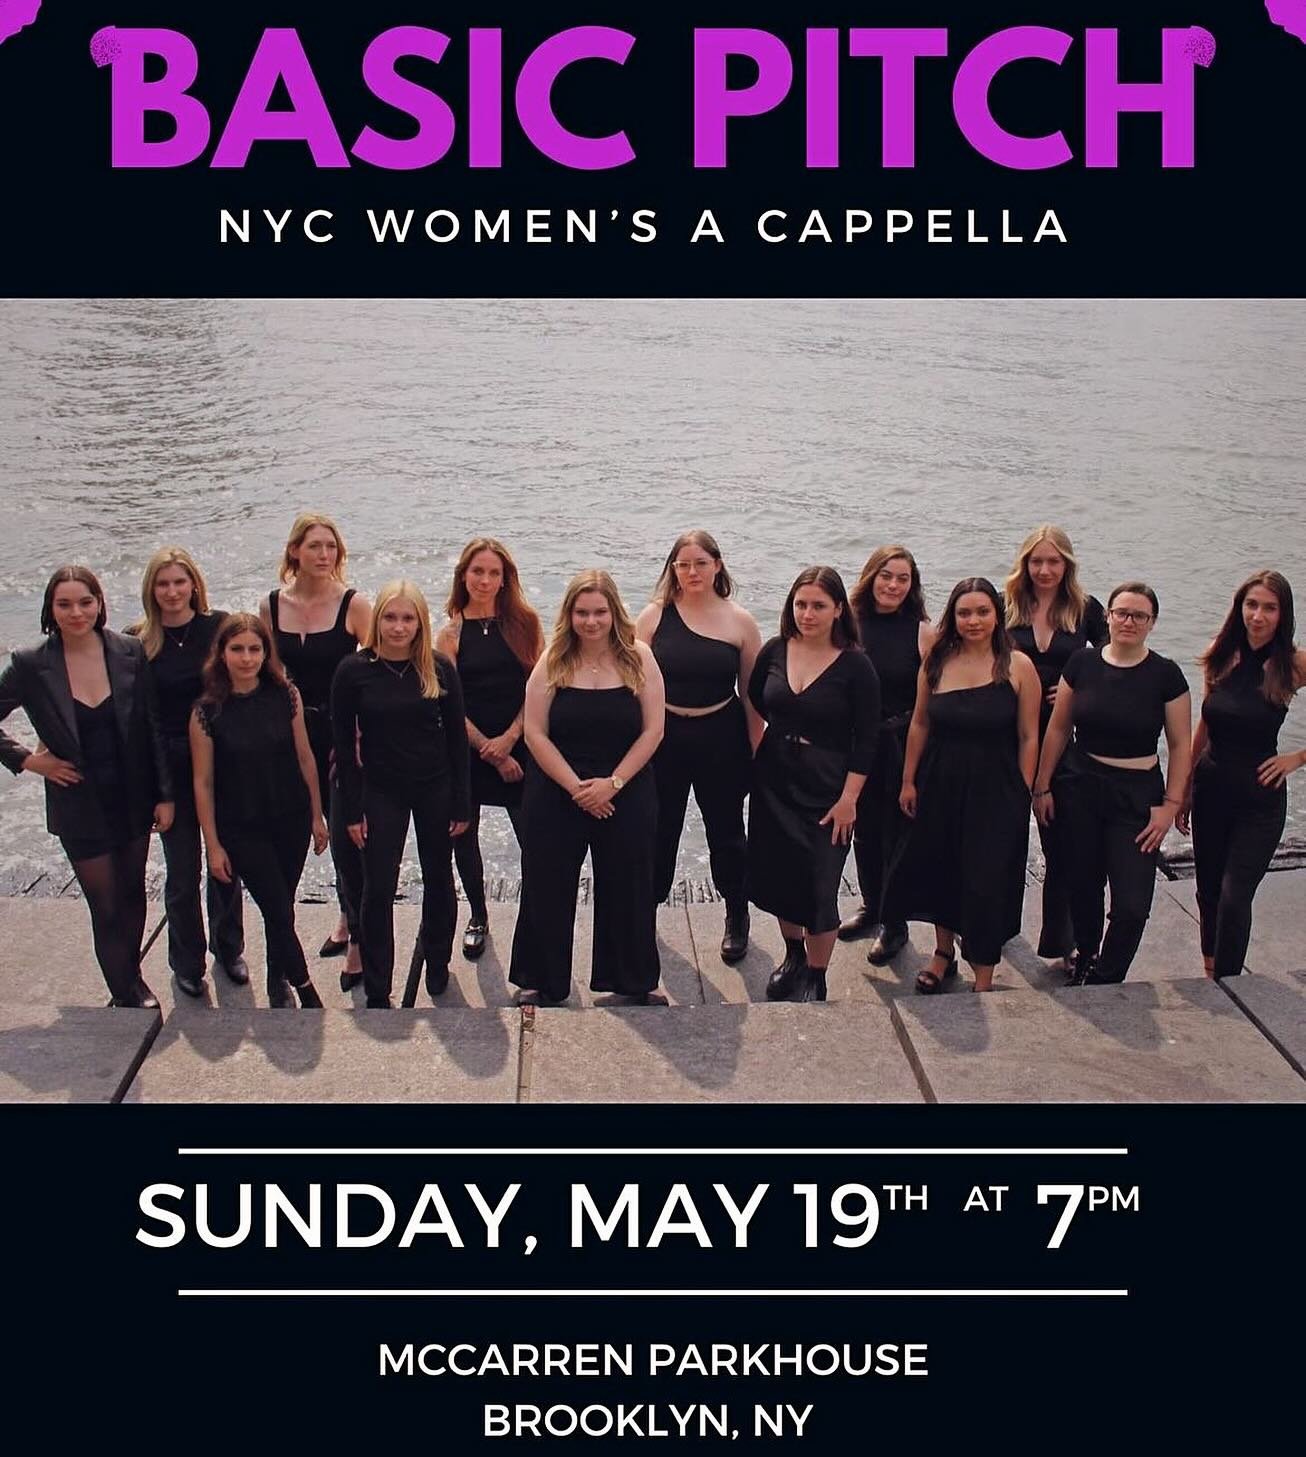 @basicpitchnyc women&rsquo;s a cappella graces parkhouse this Sunday evening at 7pm. Can&rsquo;t wait!